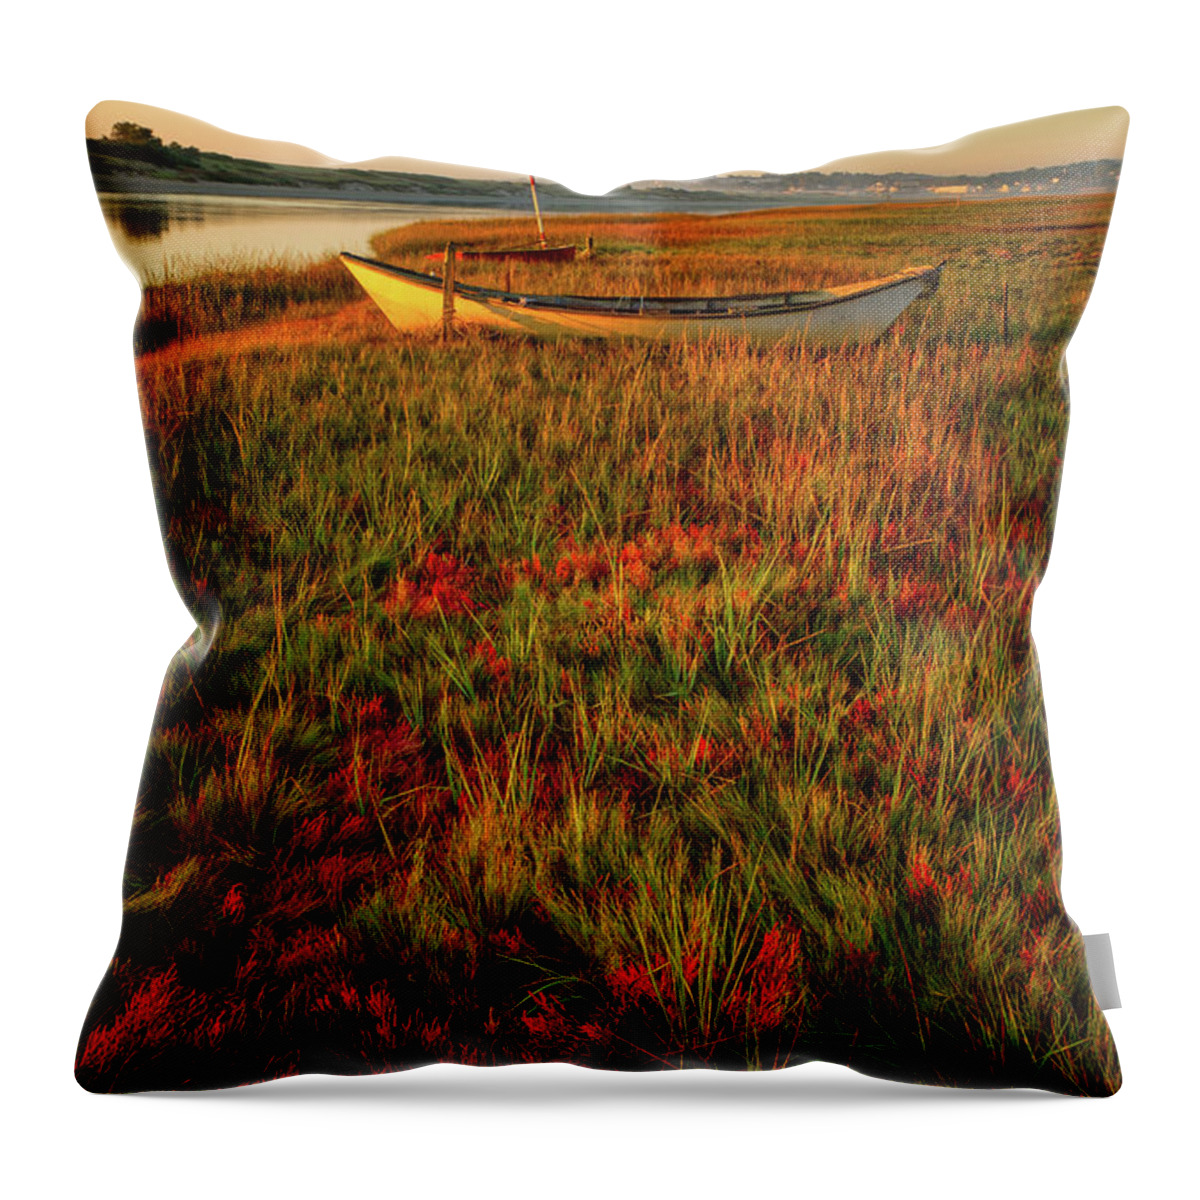 Footbridge Beach Throw Pillow featuring the photograph Morning Dory by Jeff Sinon